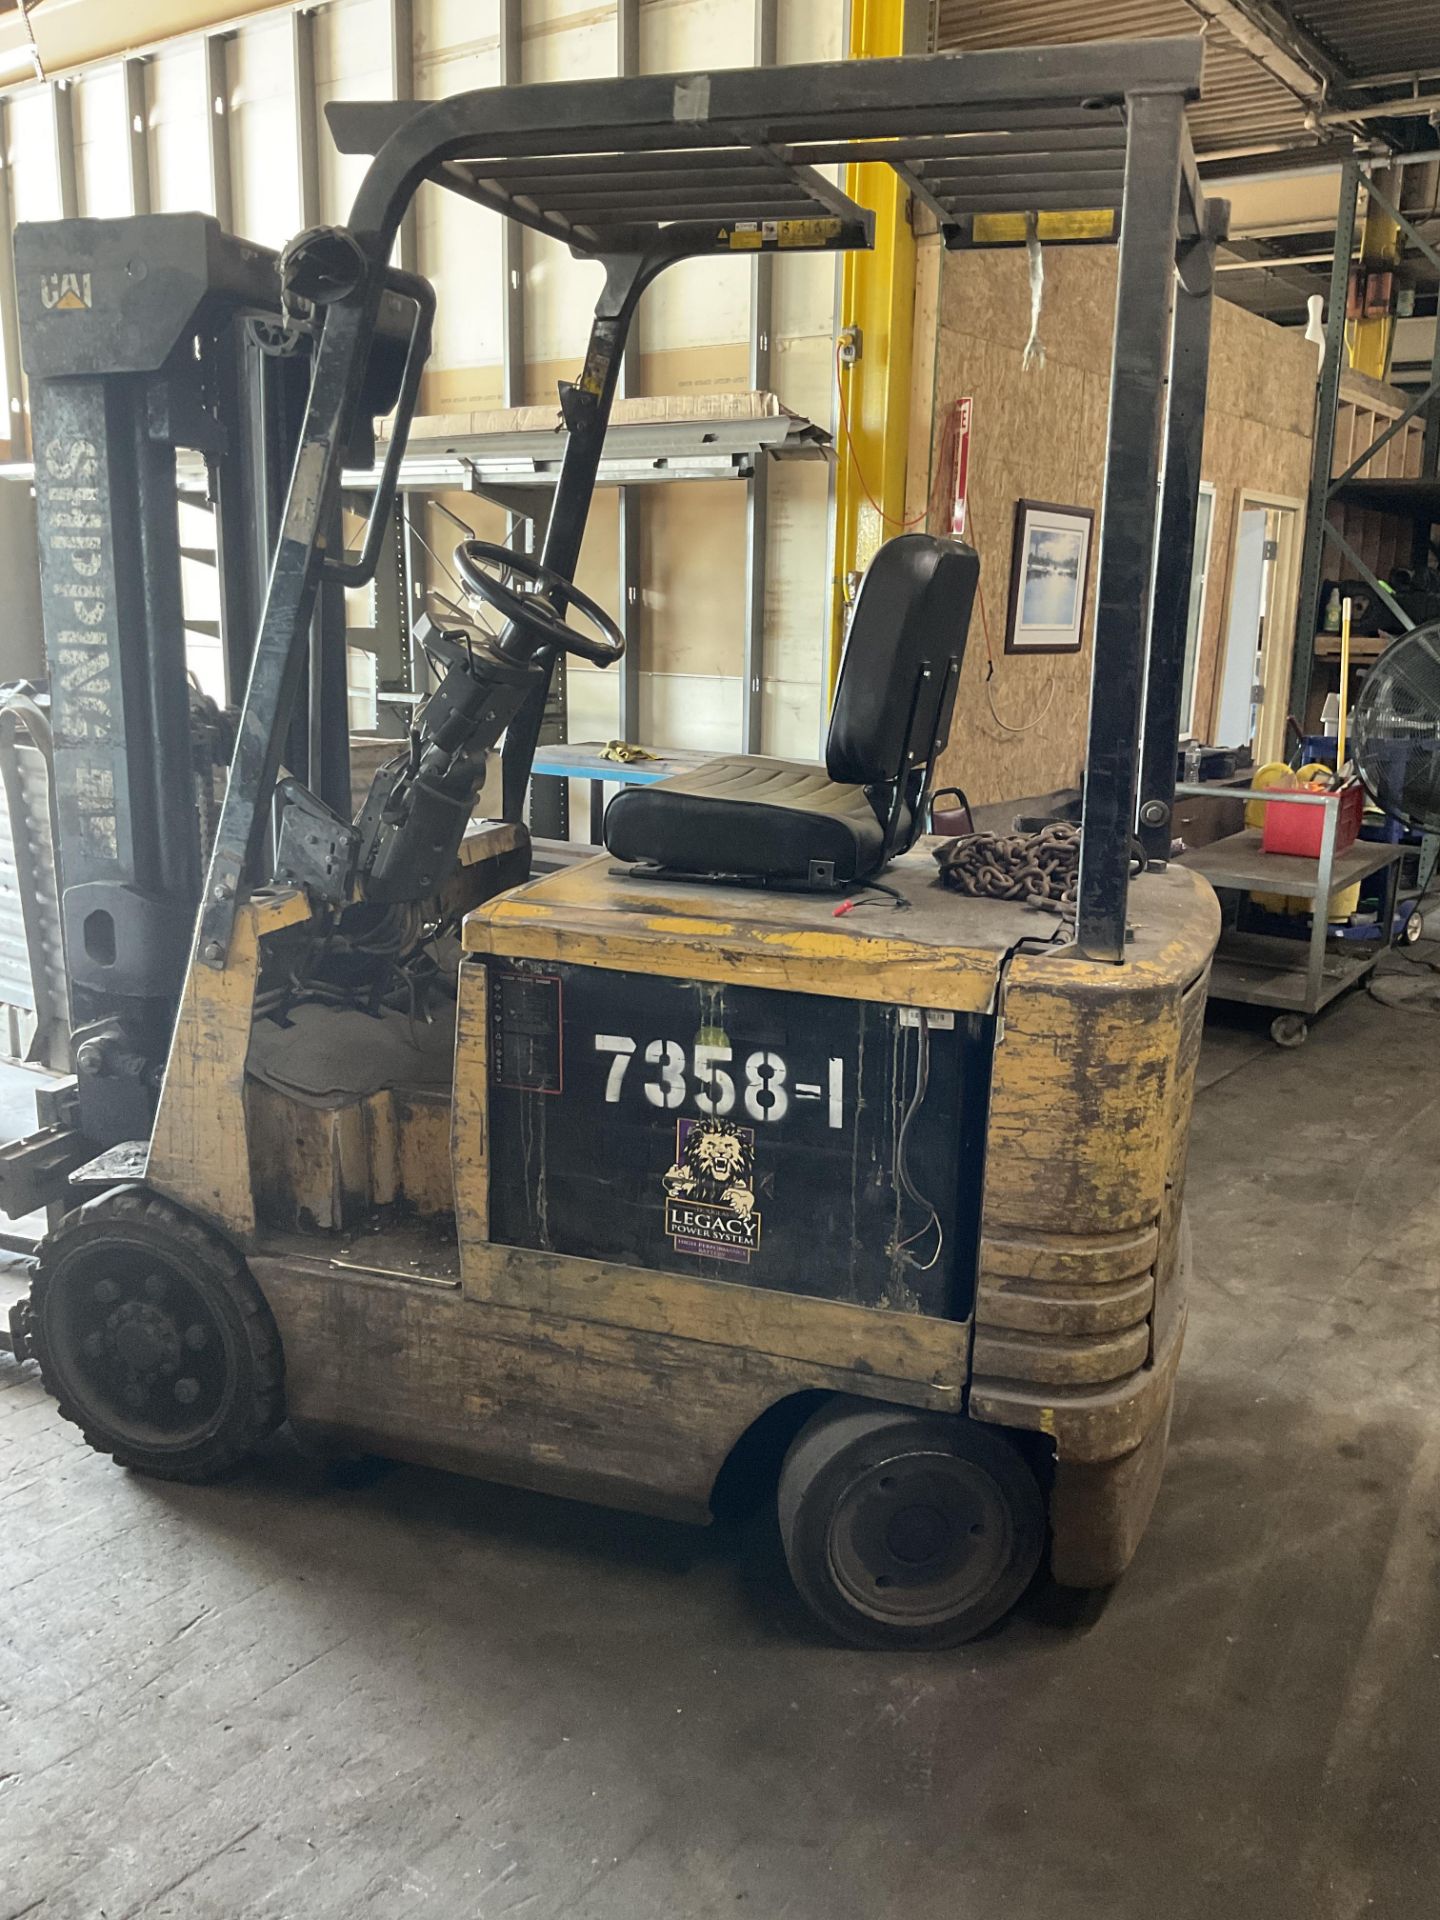 Caterpillar forklift 4500 lbs capacity - Image 12 of 25